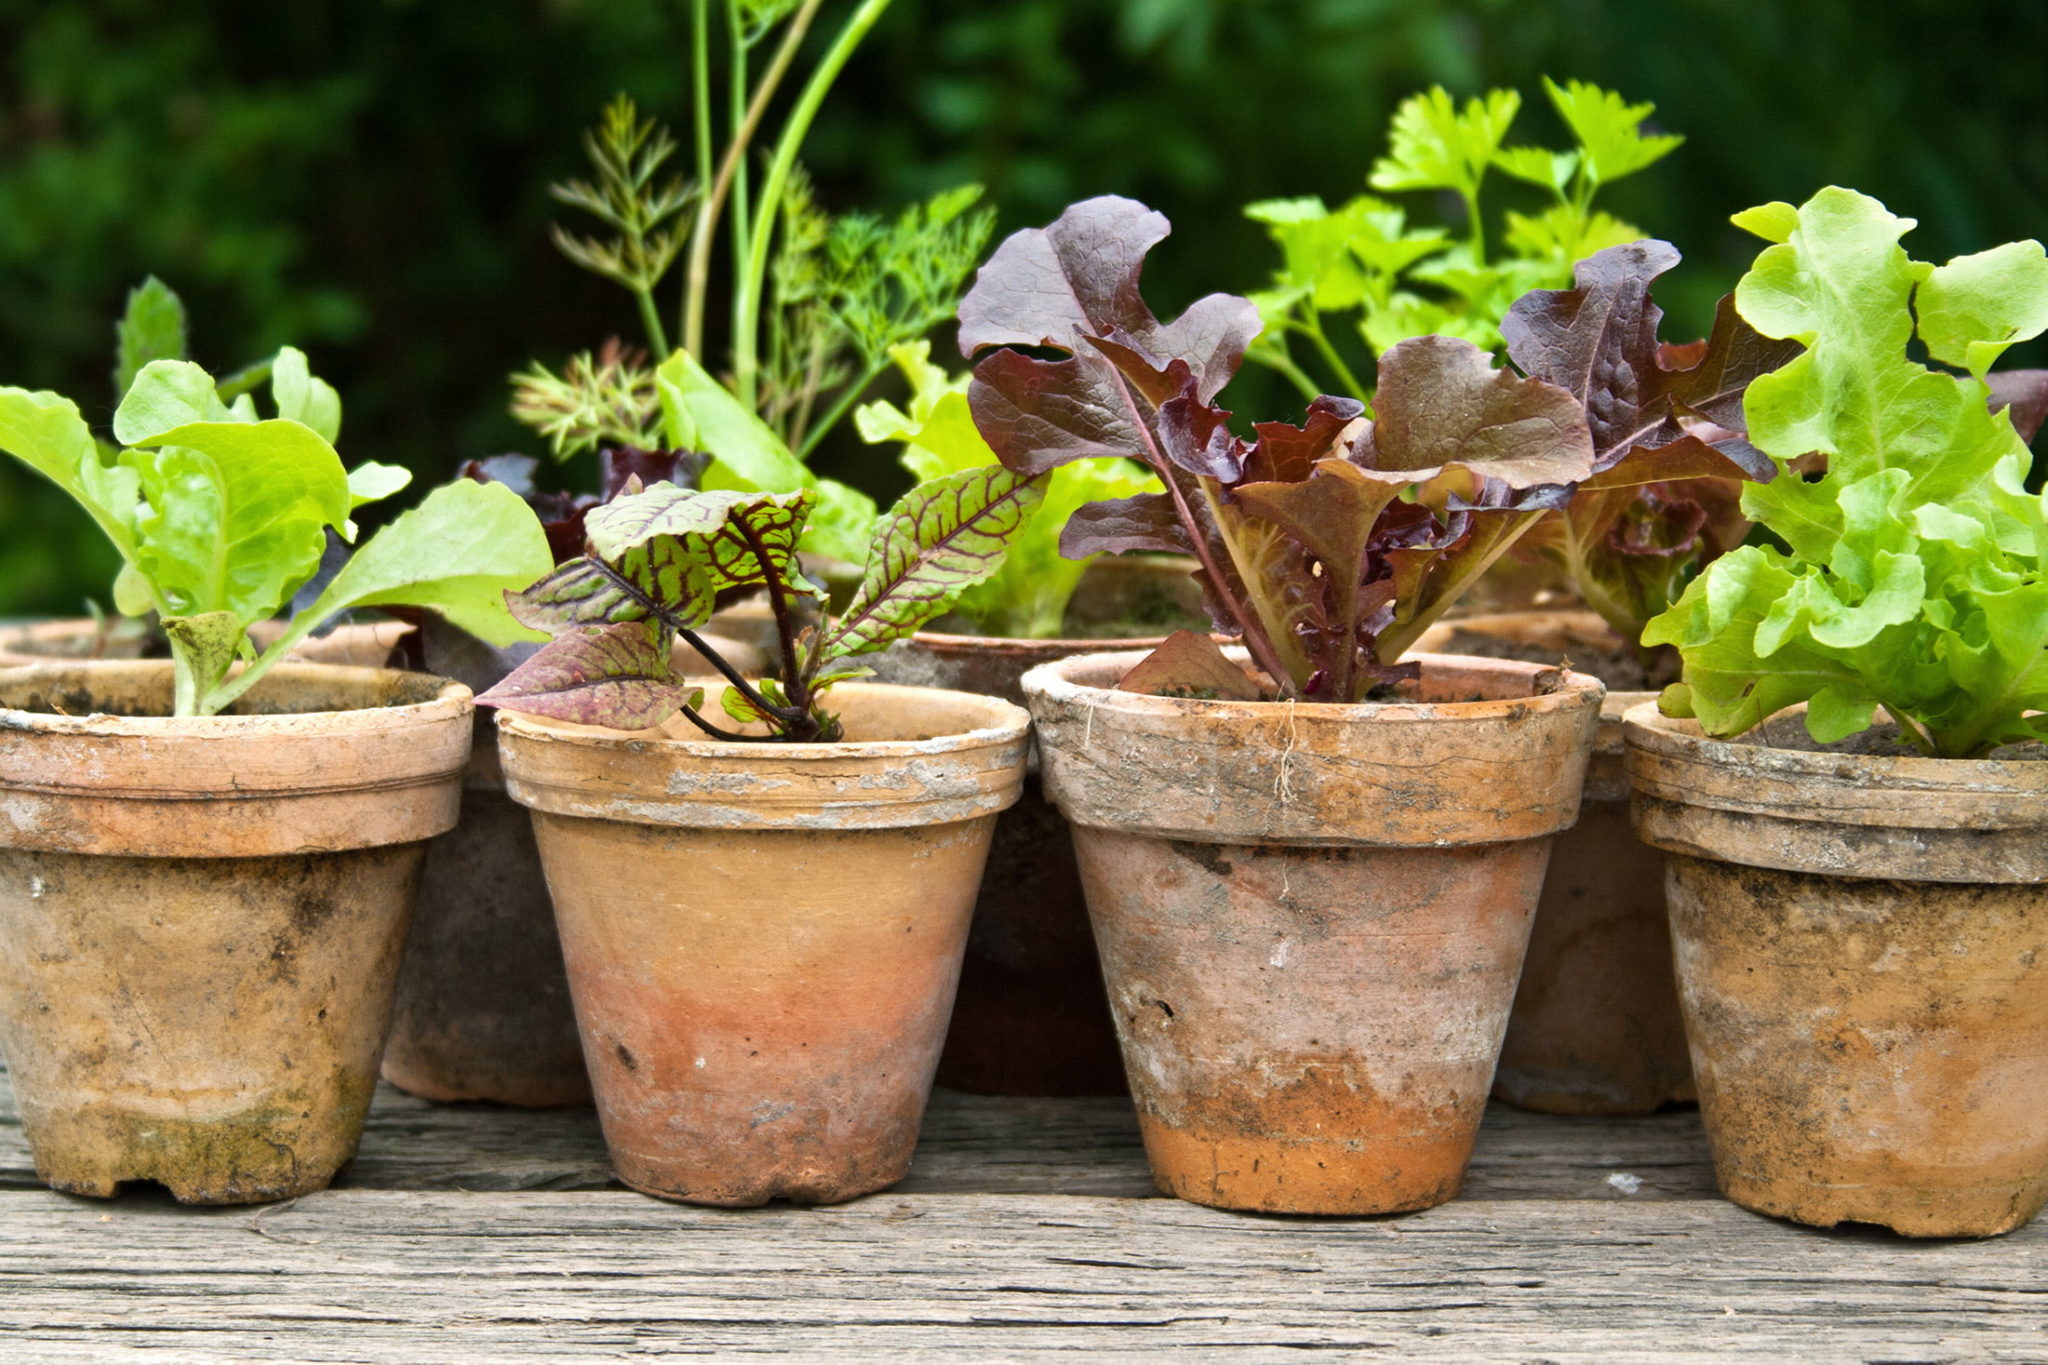 salad growing in small pots